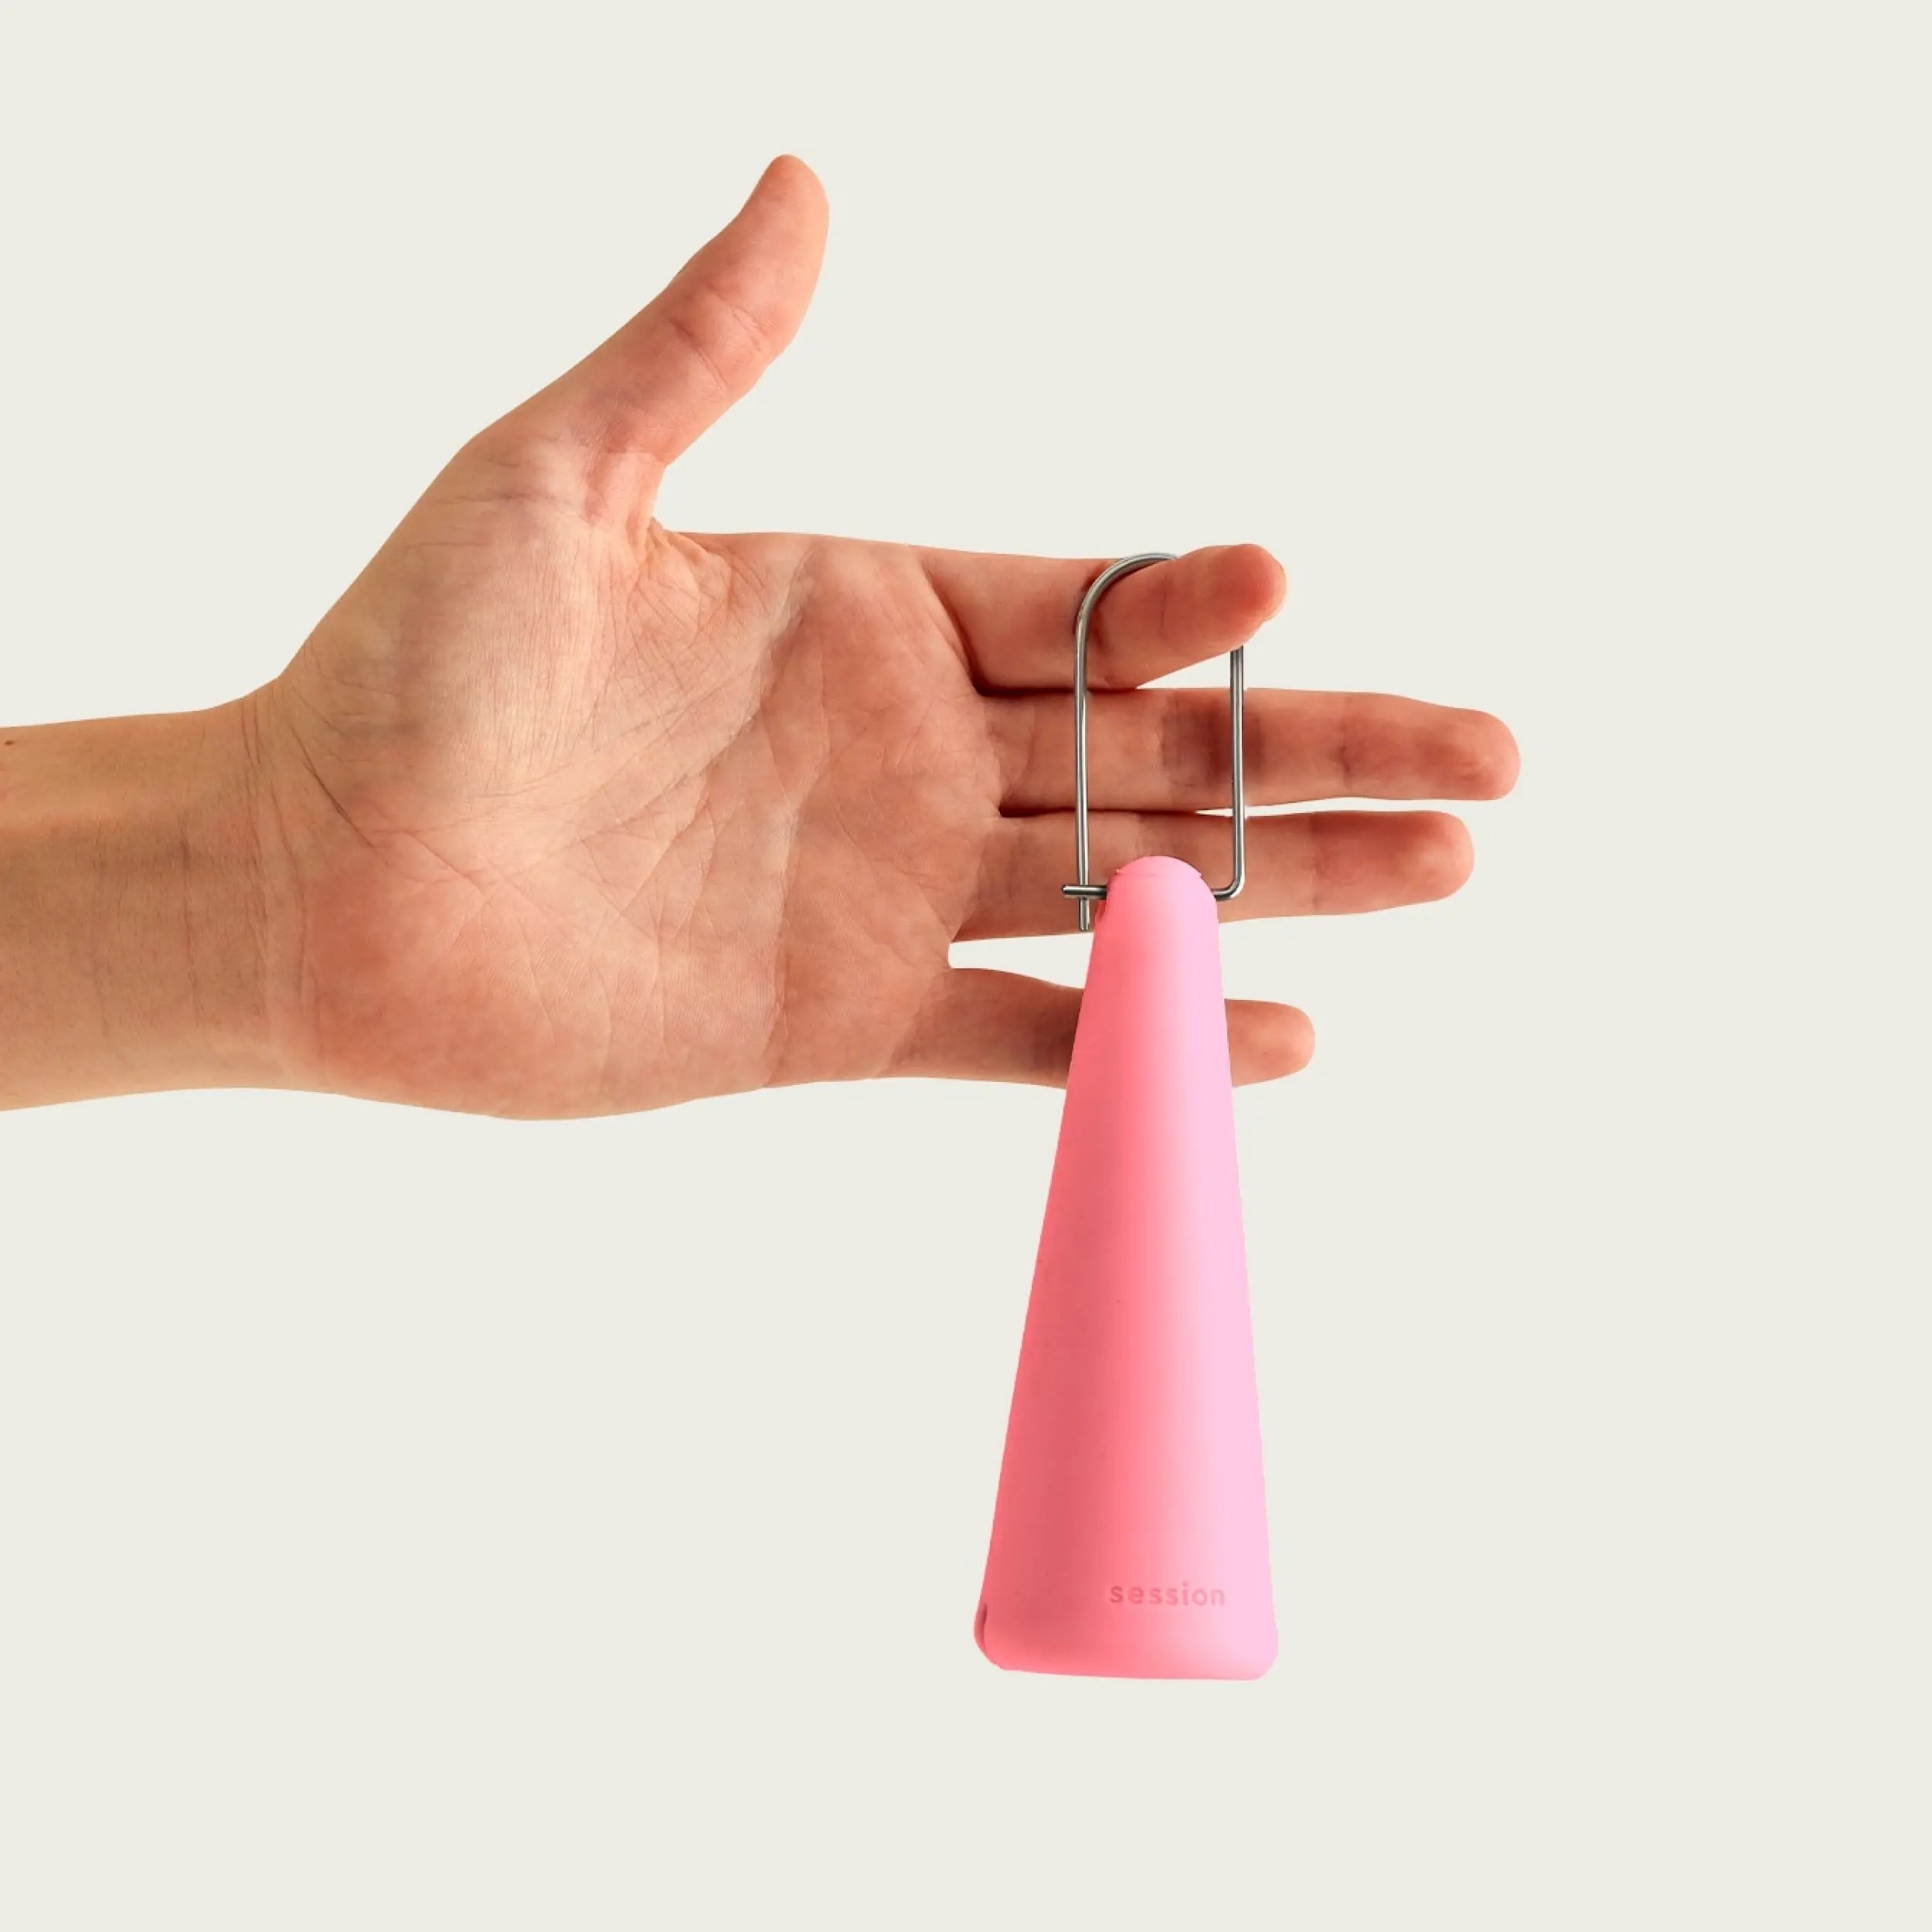 Enhance Your Session with Session Goods Silicone Sleeve in Blush Pink.